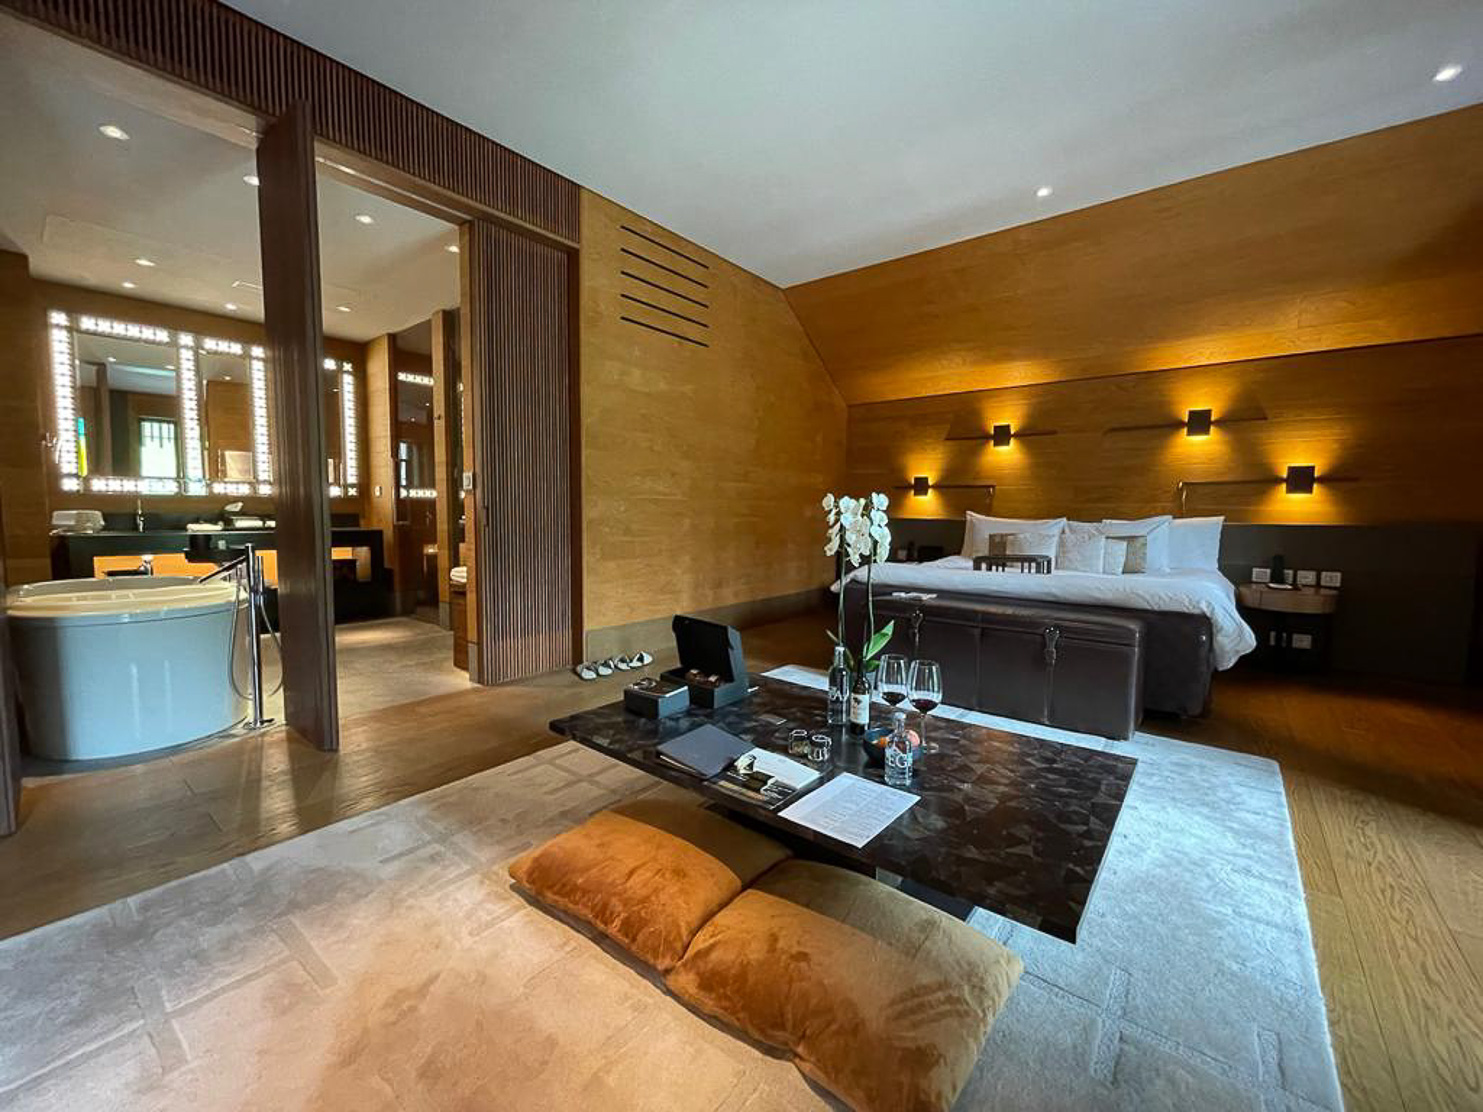 The Chedi Andermatt The suites are the epitome of sumptuous. The spacious, chalet-style rooms are equipped with fireplaces and are stocked with Acqua Di Parma toiletries